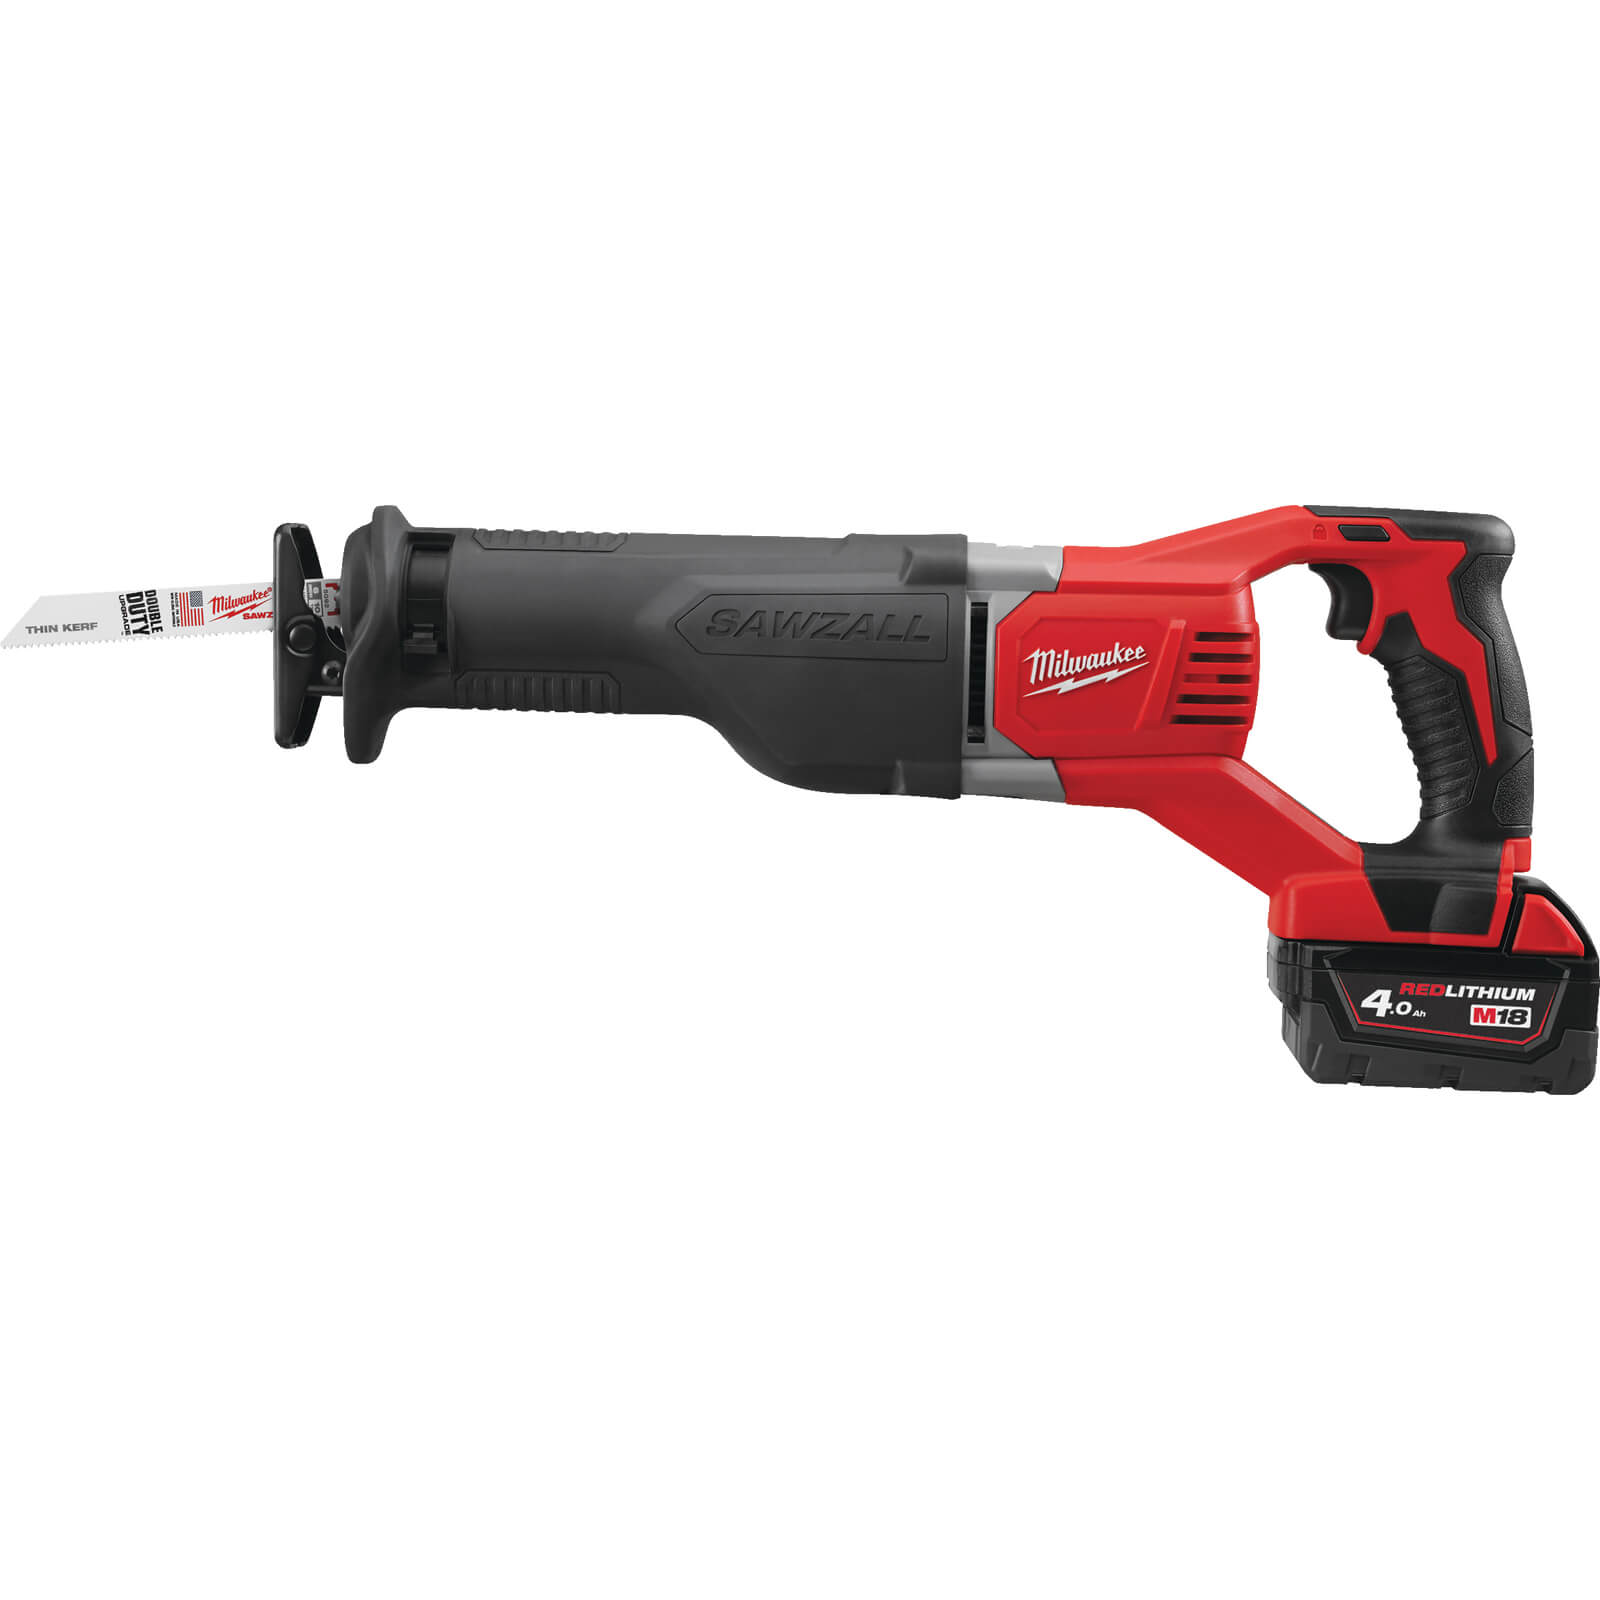 Image of Milwaukee M18 BSX 18v Cordless Sawzall Reciprocating Saw 2 x 4ah Li-ion Charger Case